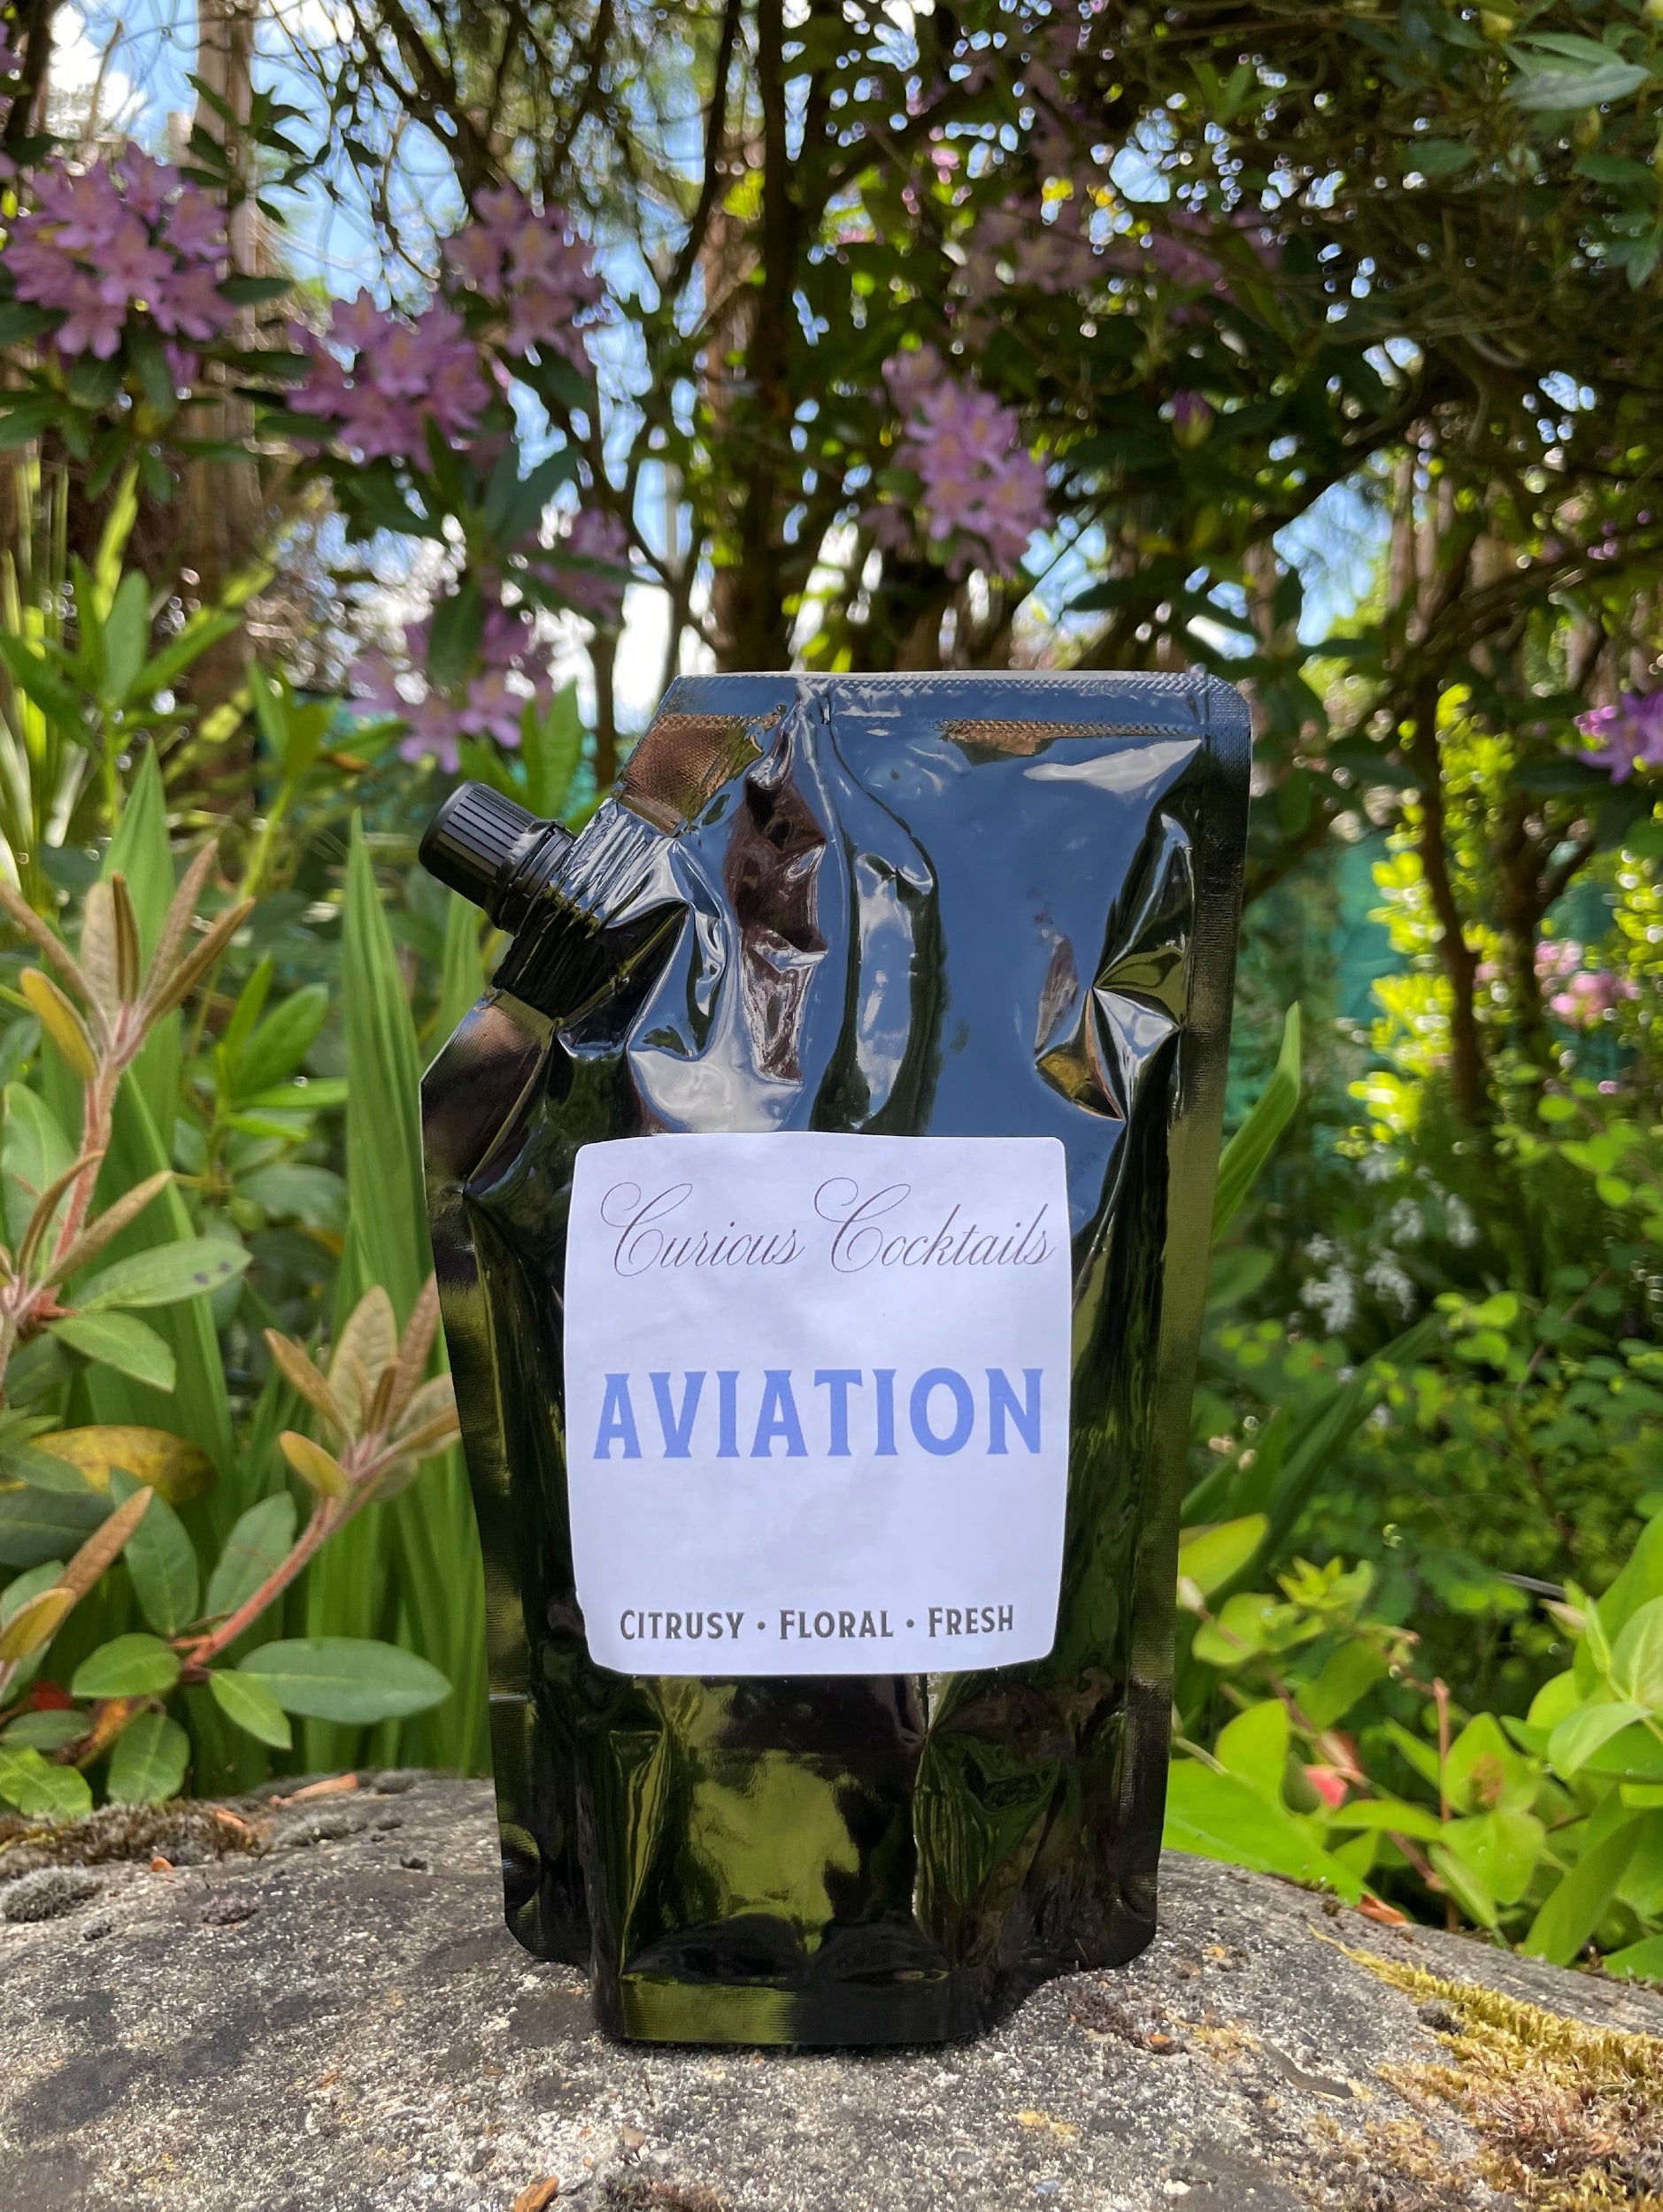 Curious Cocktails: Aviation 500ml Refill Pouch (Save £13)